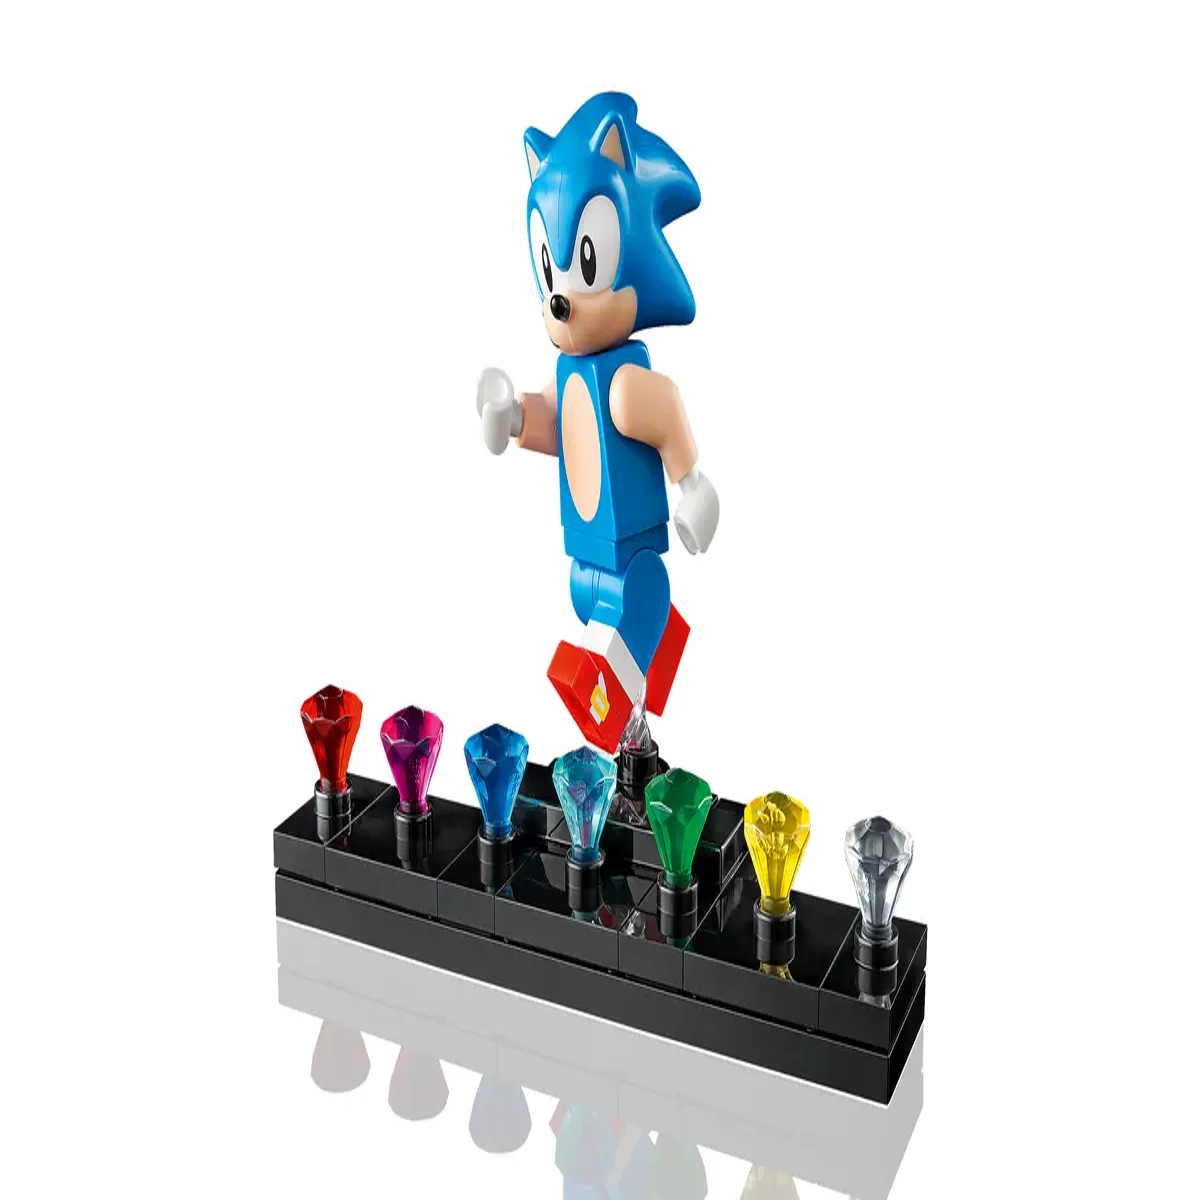 LEGO Sonic the Hedgehog Knuckles & Rouge 2024 Set OFFICIALLY Revealed 